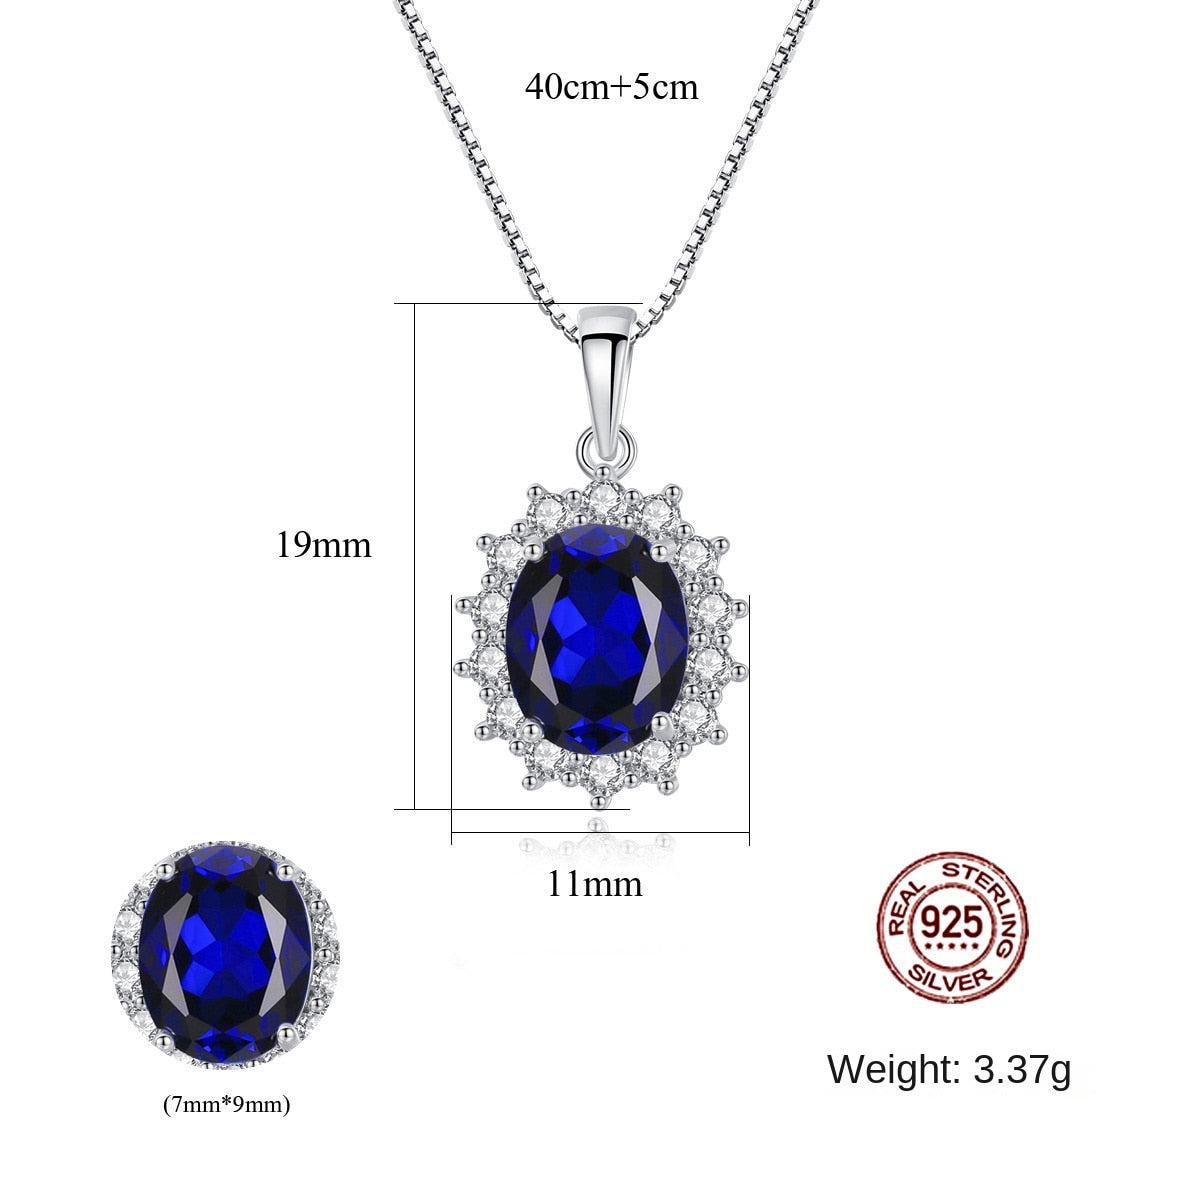 Gemstonely-925 Sterling Silver Necklace with Imitation Sapphire - Sophisticated Design for Upscale Occasions